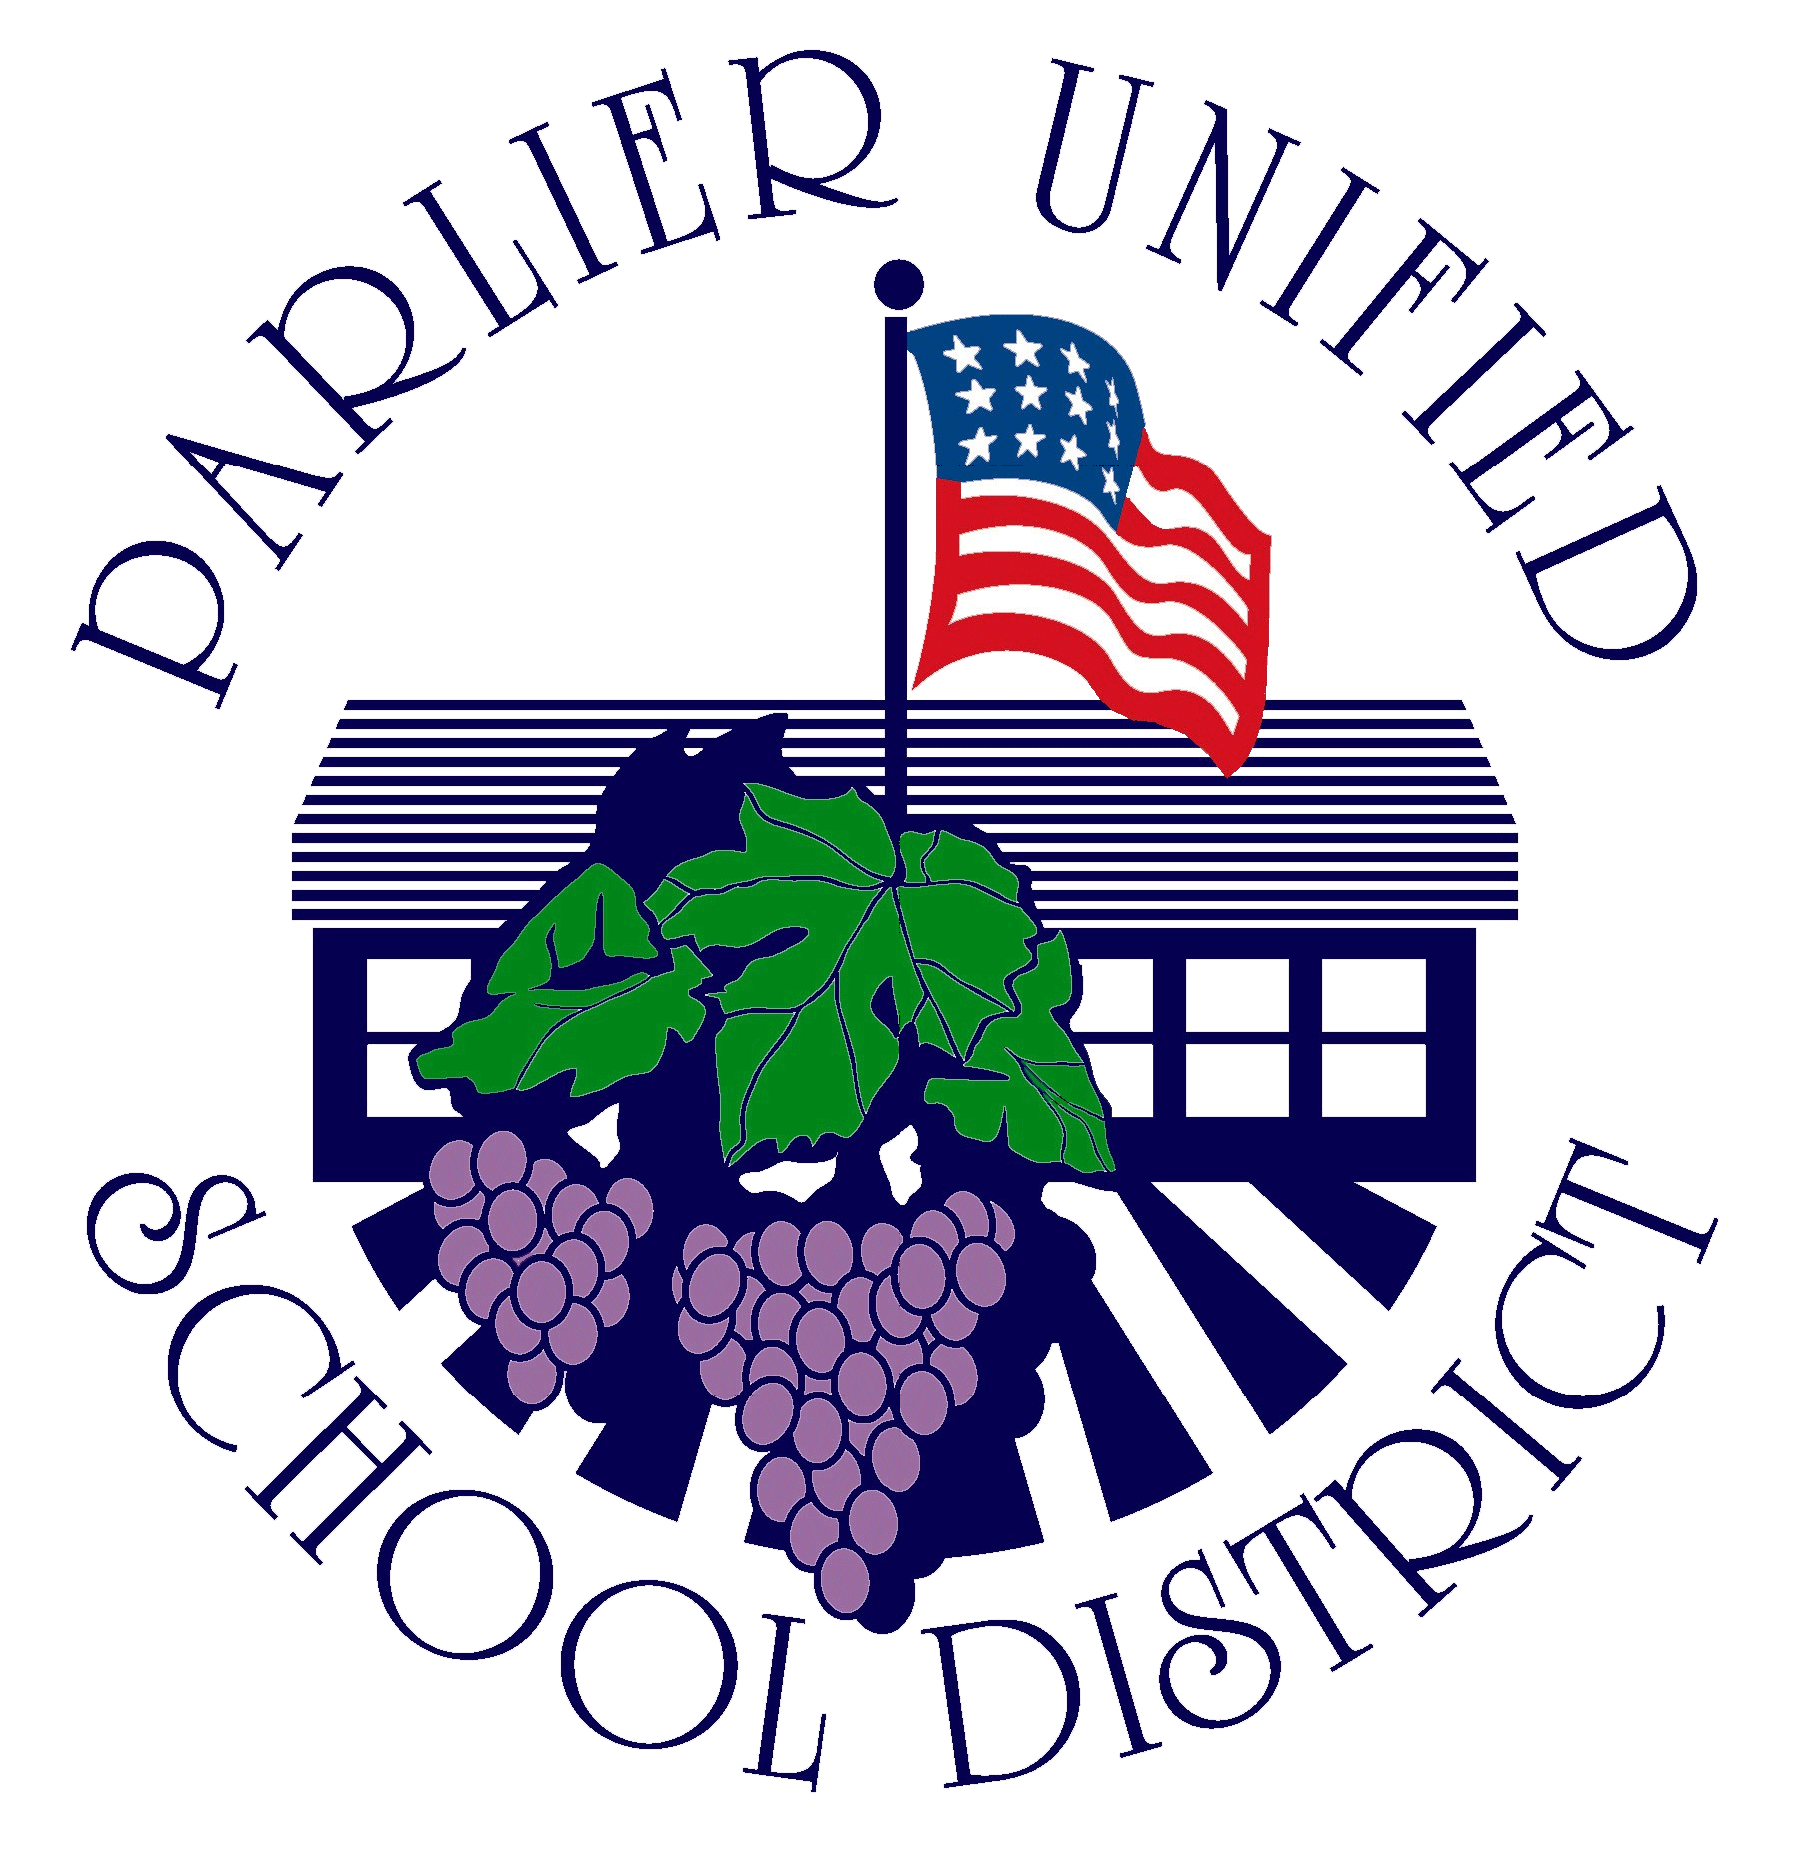 Image displays the logo for Parlier Unified School District.